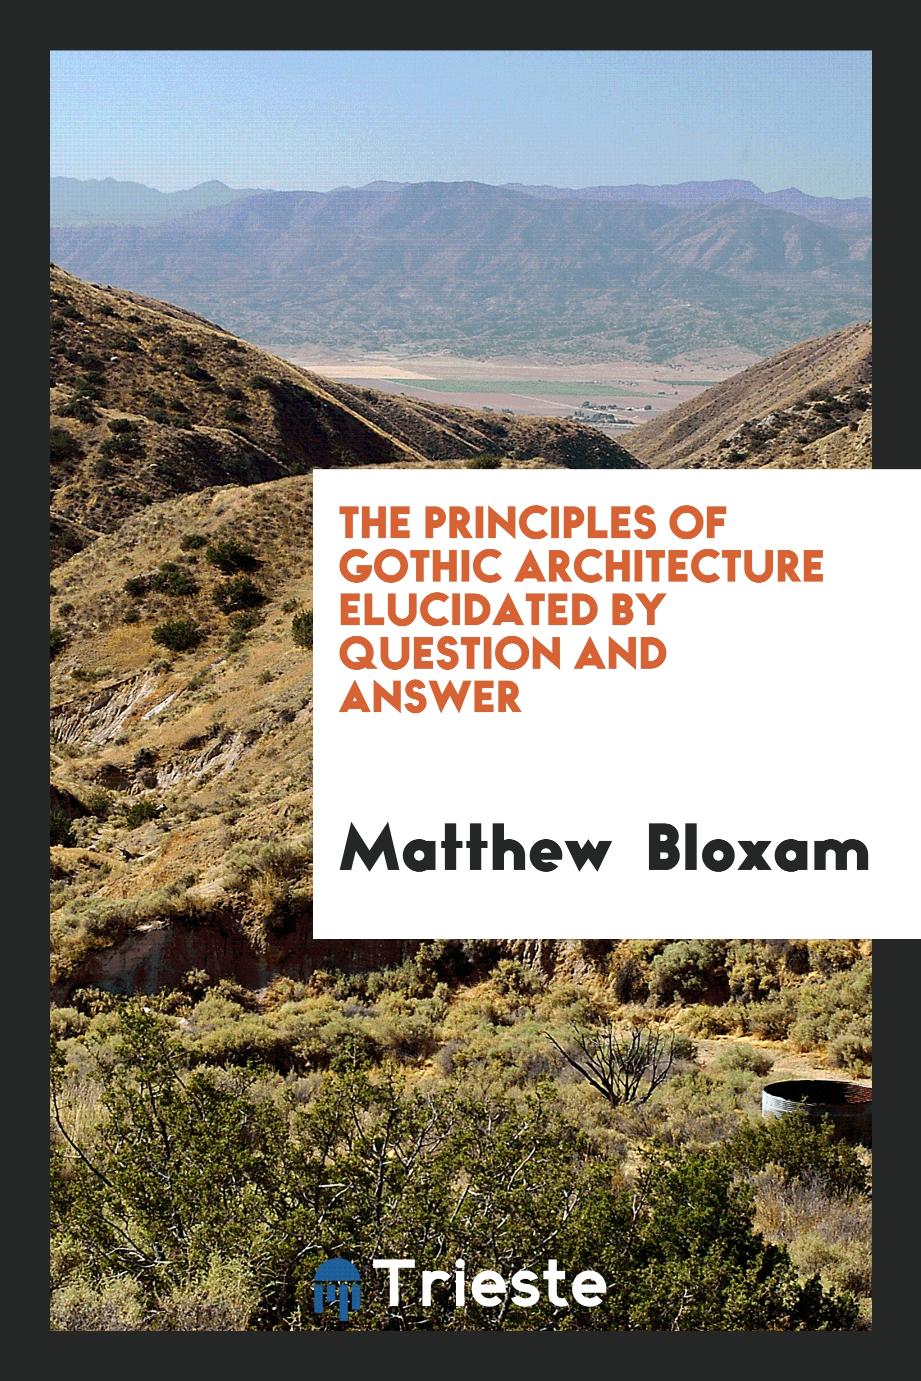 The principles of Gothic architecture elucidated by question and answer